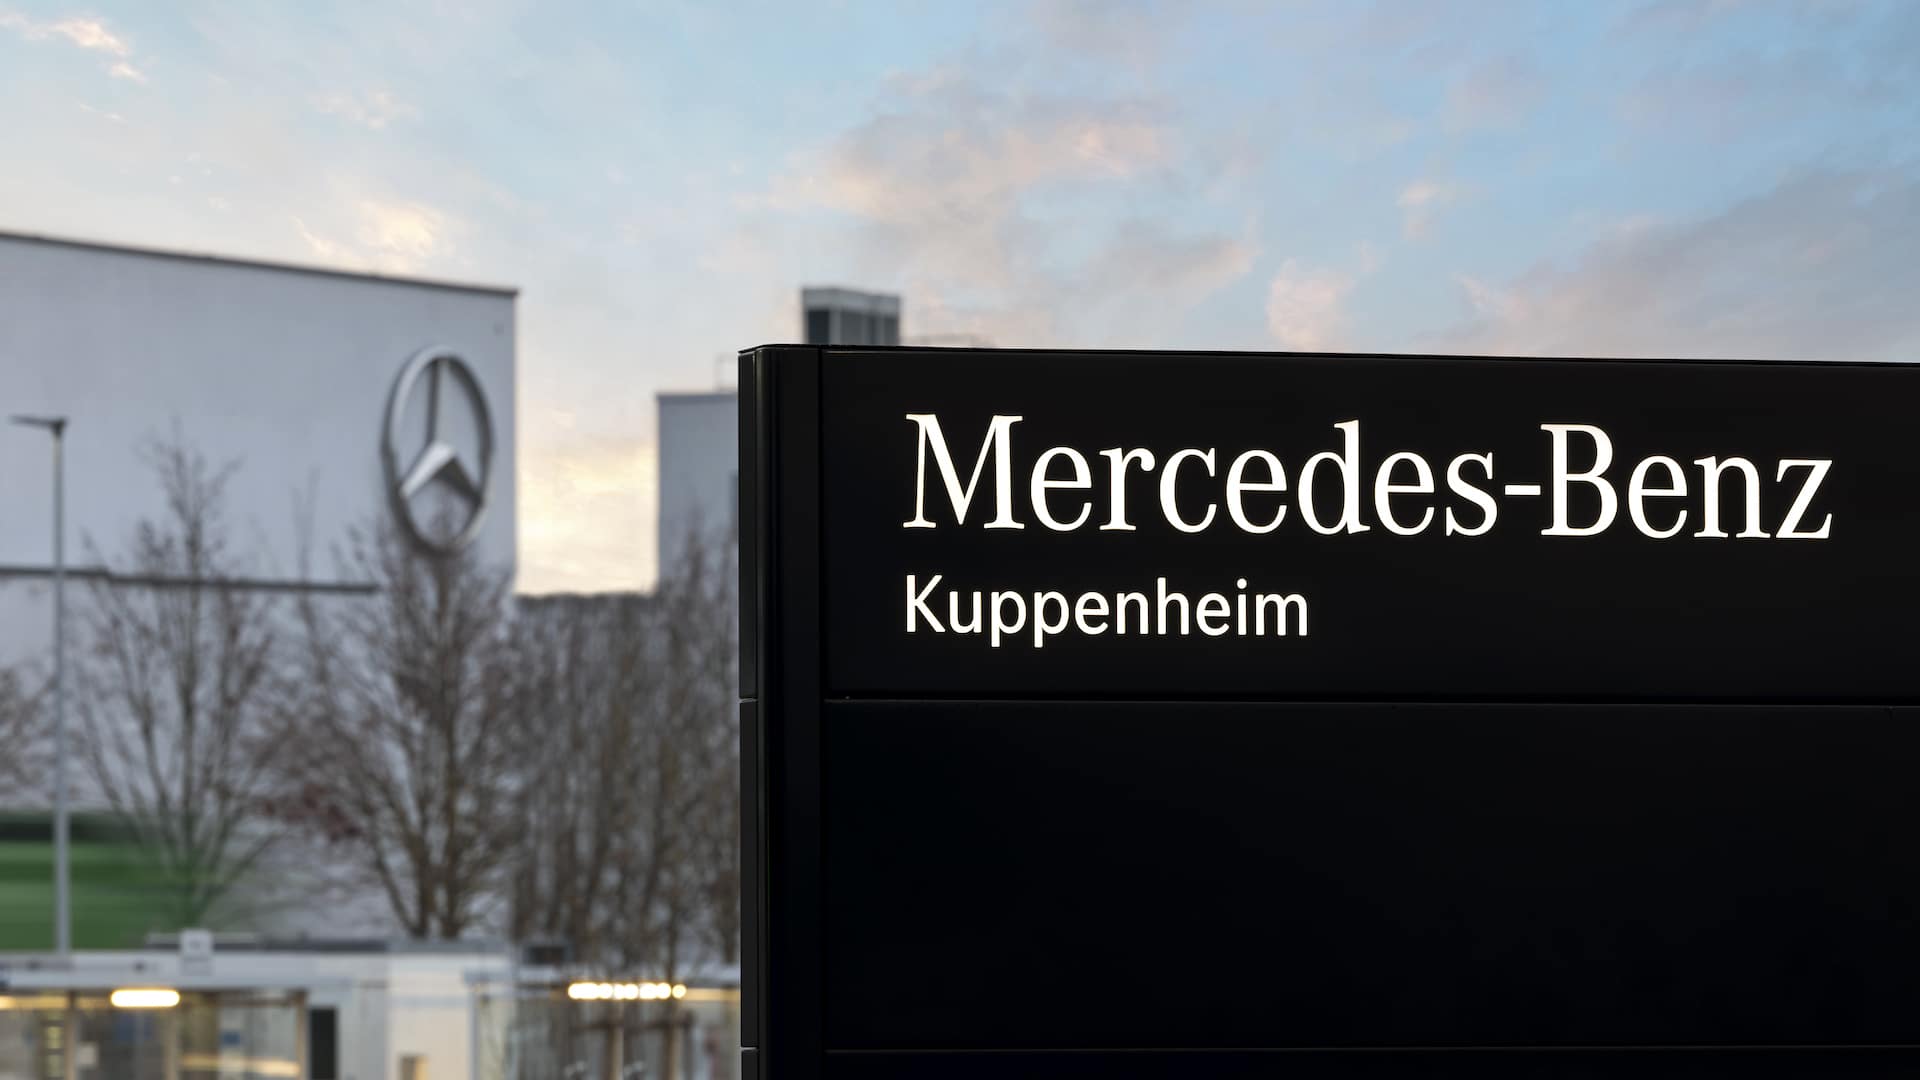 Mercedes-Benz breaks ground on battery recycling factory in Germany